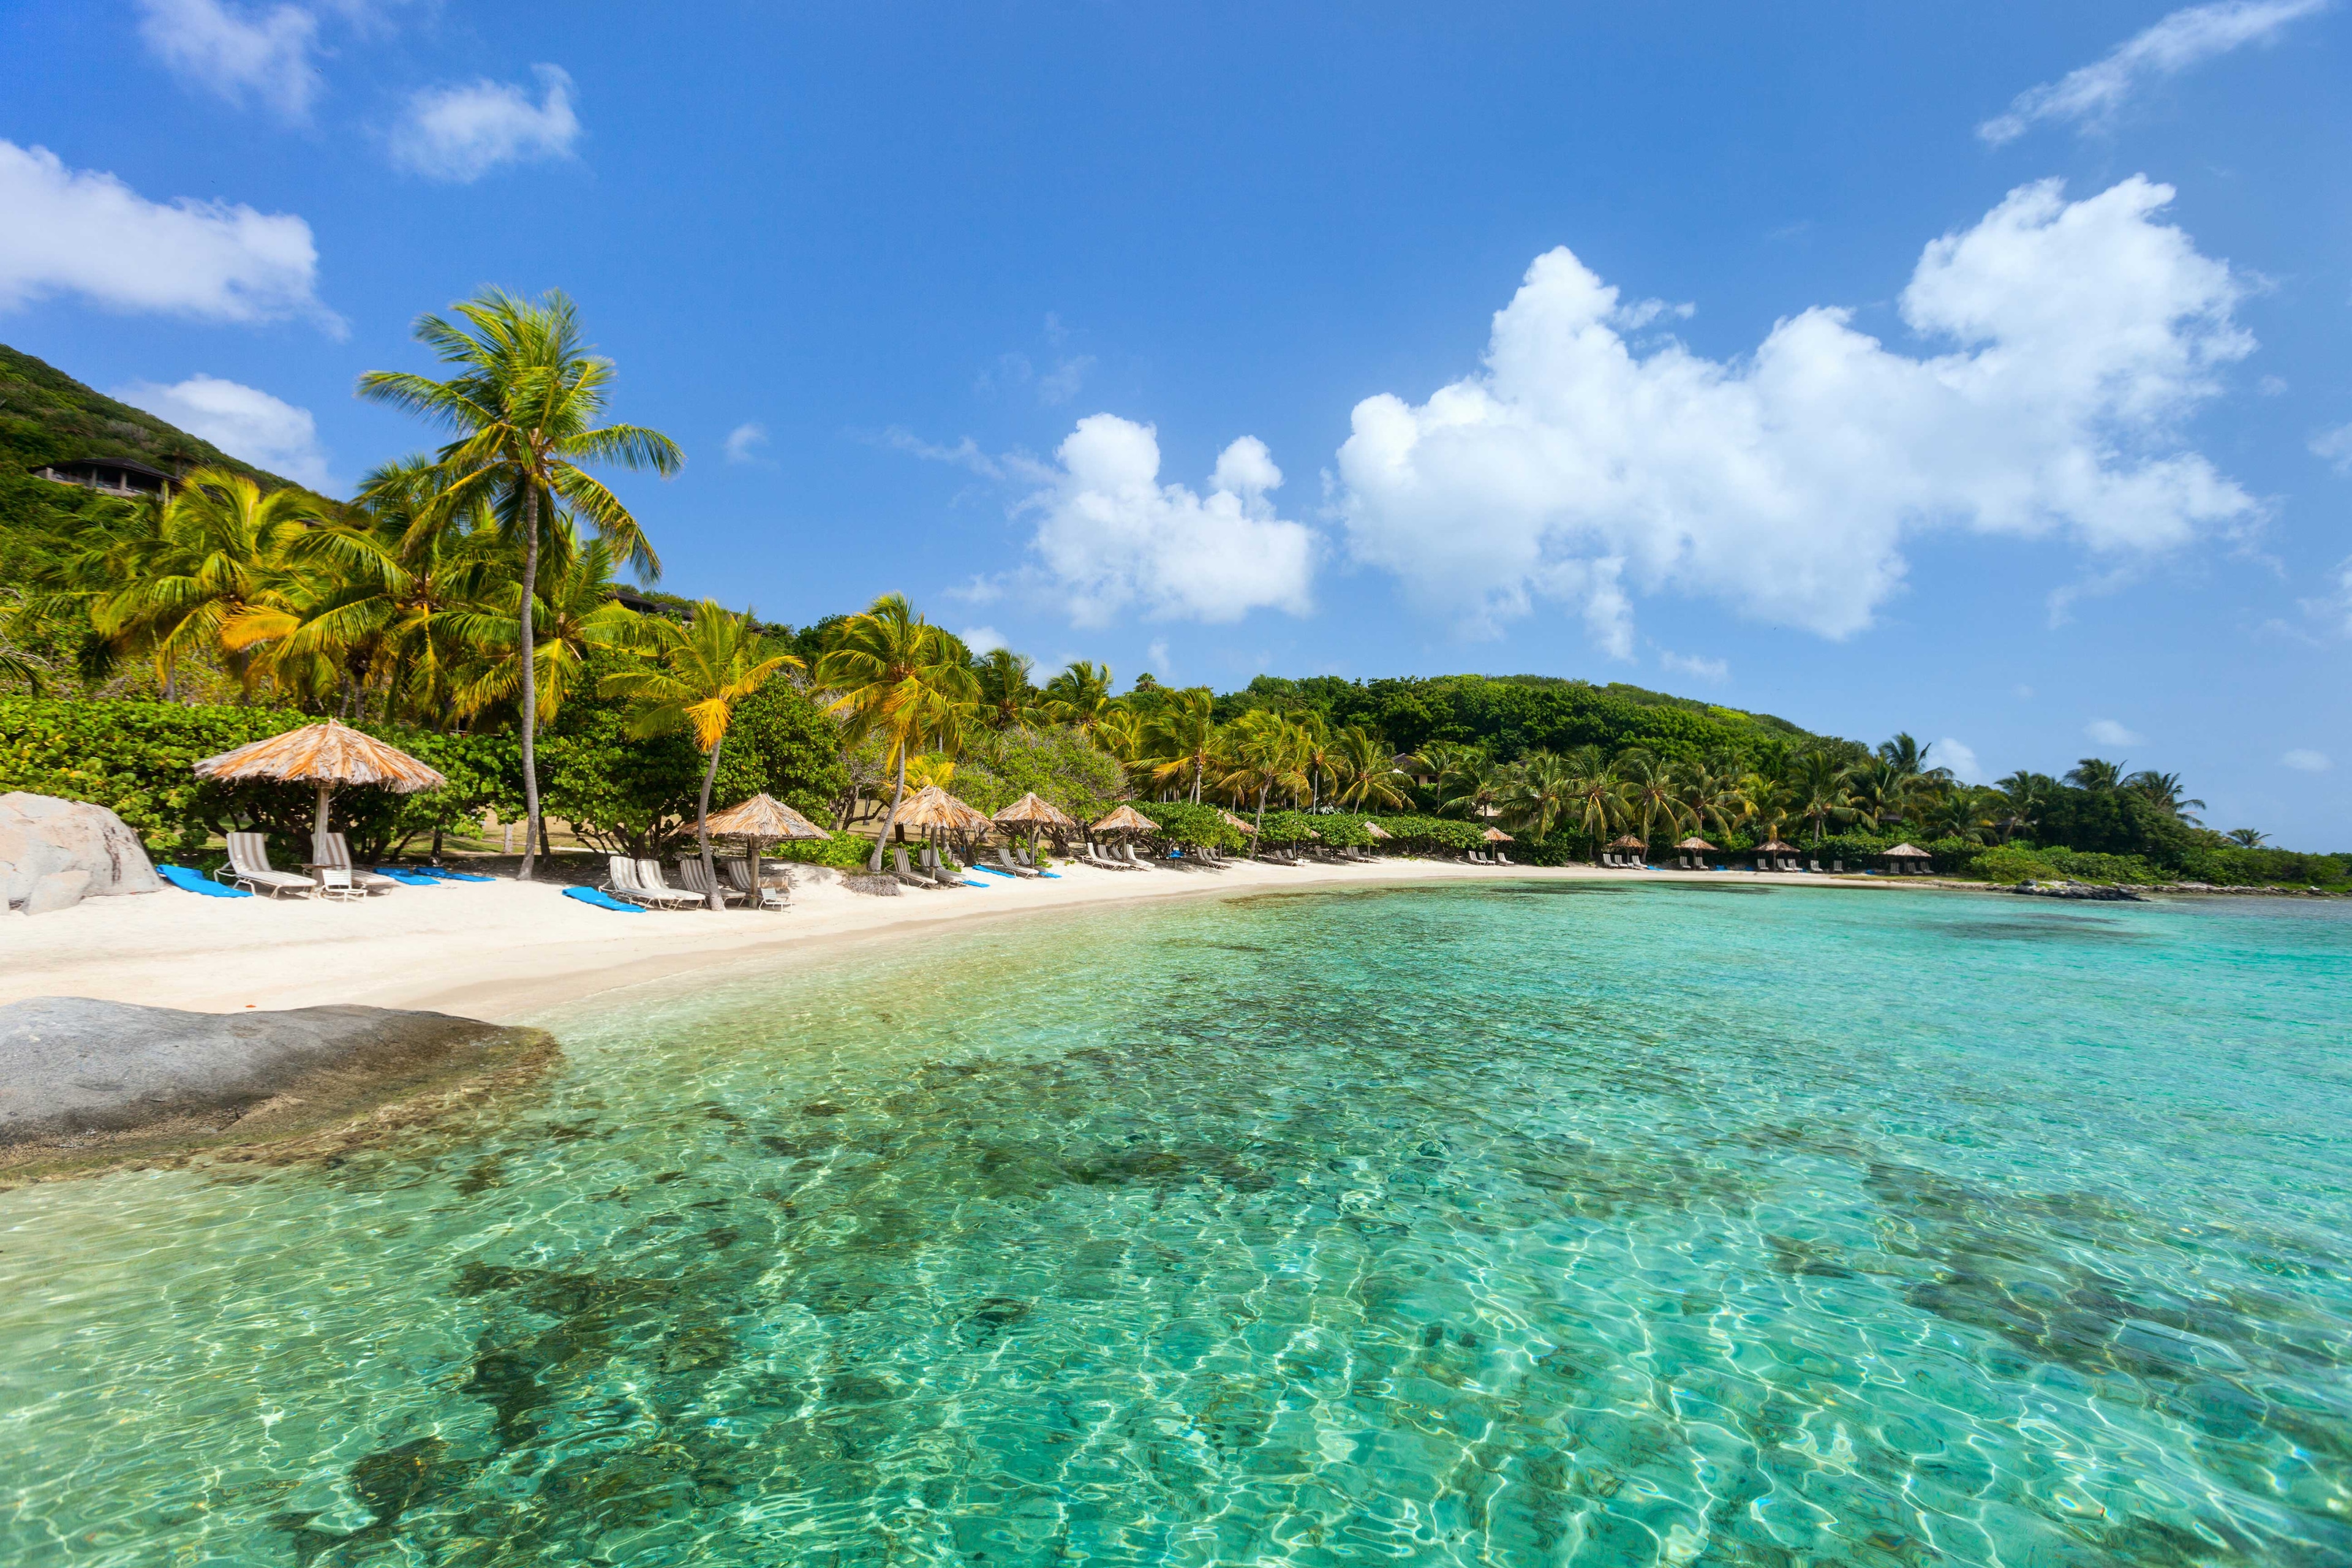 Things To Do On Your Sunny Caribbean Getaway